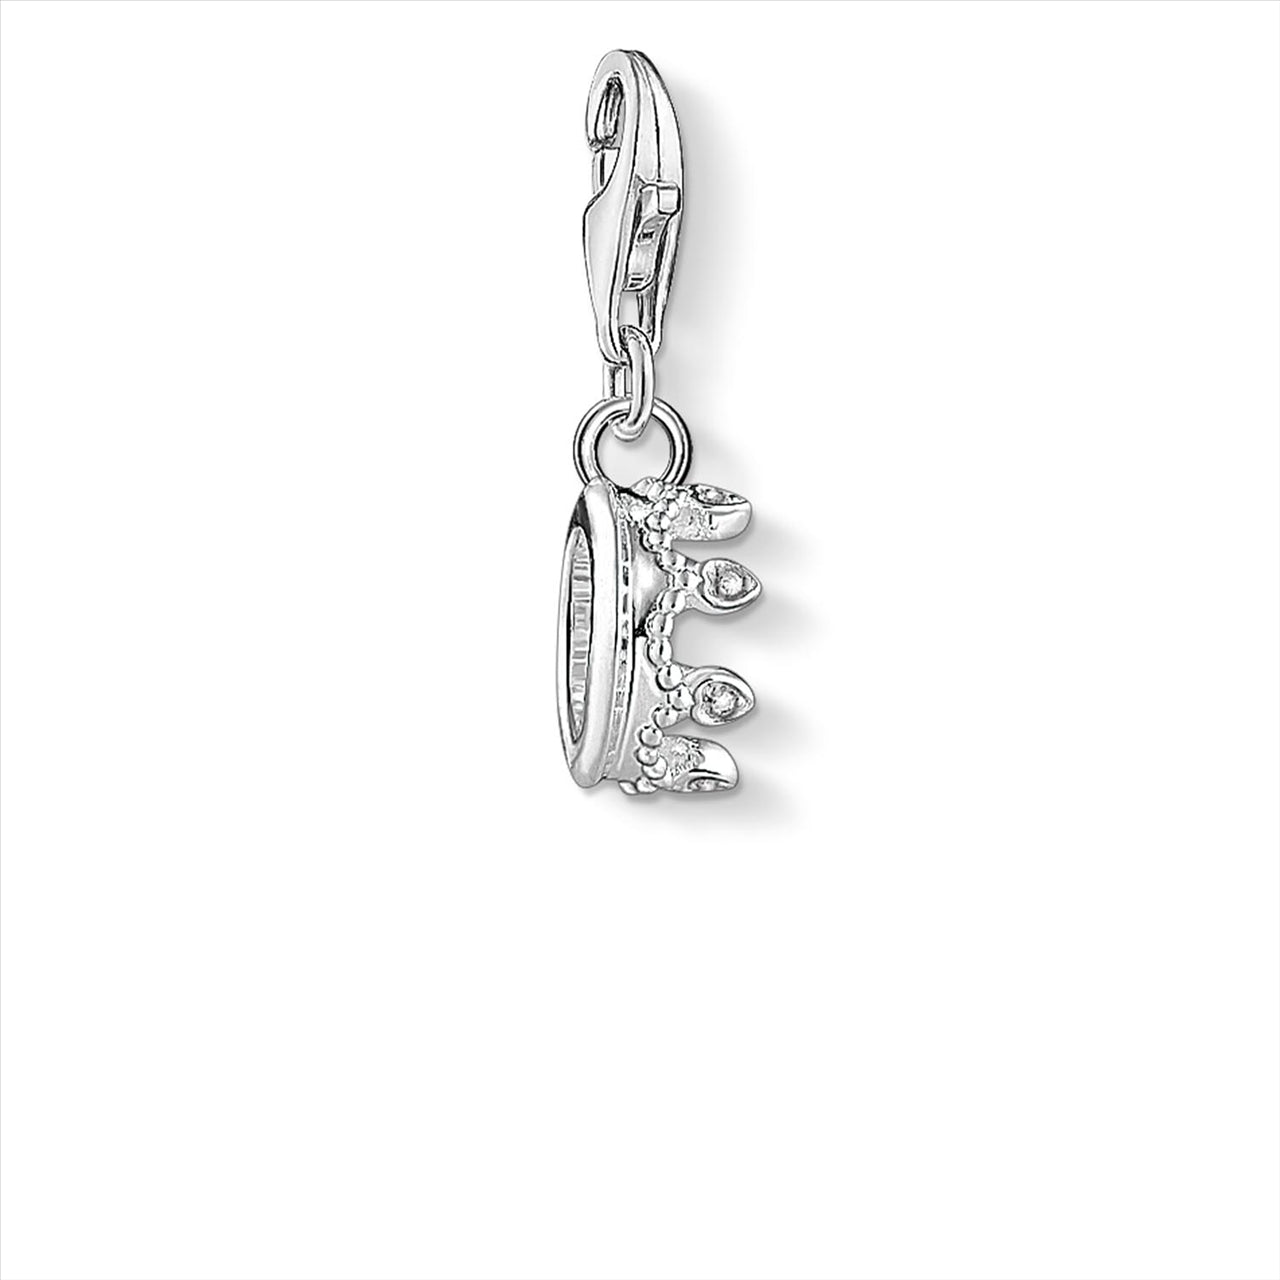 Thomas Sabo "The Crown" Charm Sterling Silver